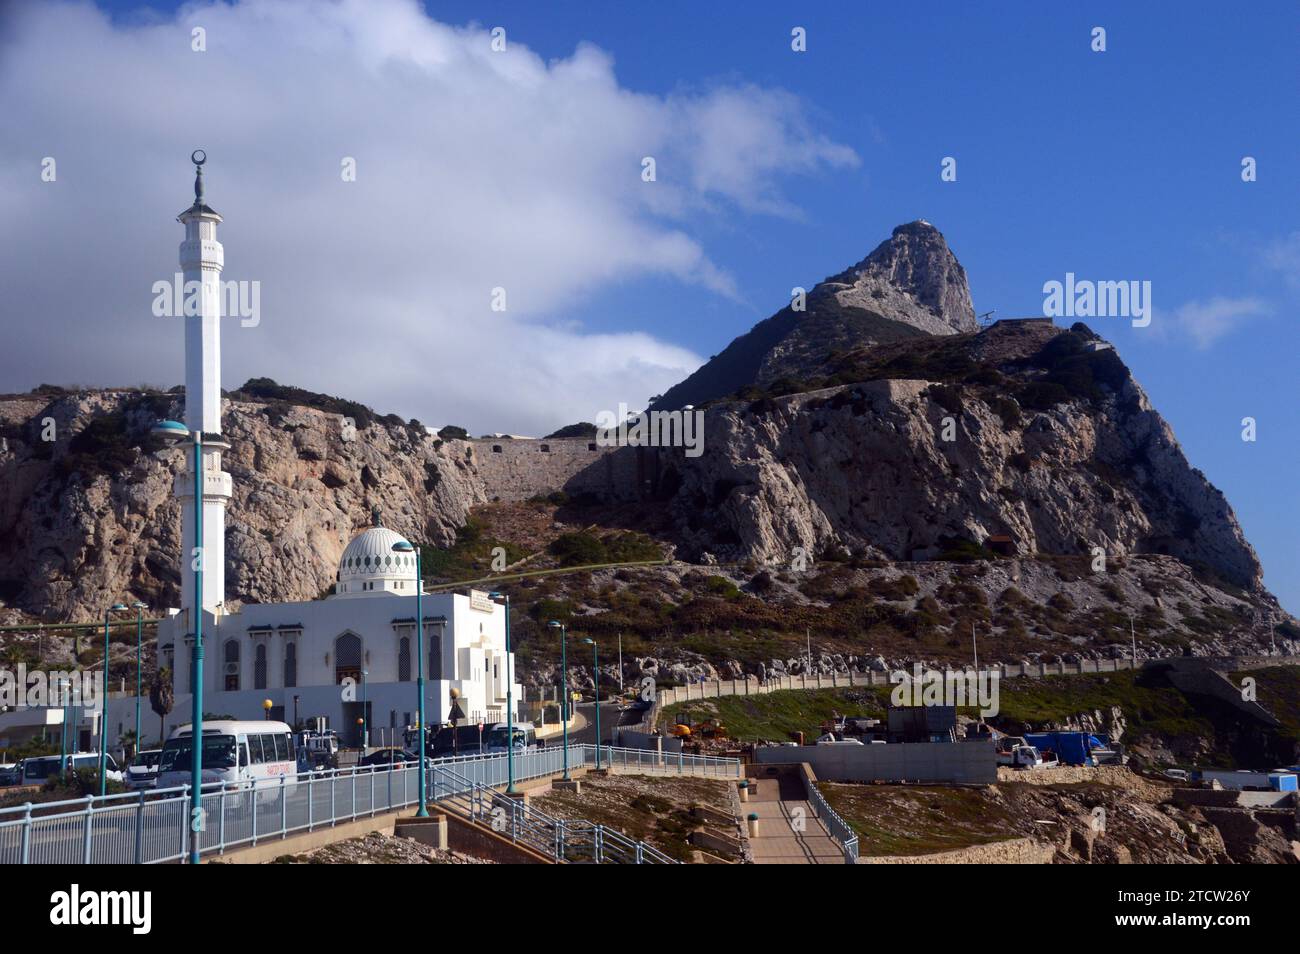 The Limestone Rock of Gibraltar and 'Ibrahim al Ibrahim Mosque' at Europa Point in Gibraltar, British Overseas Territory, Spain, EU. Stock Photo